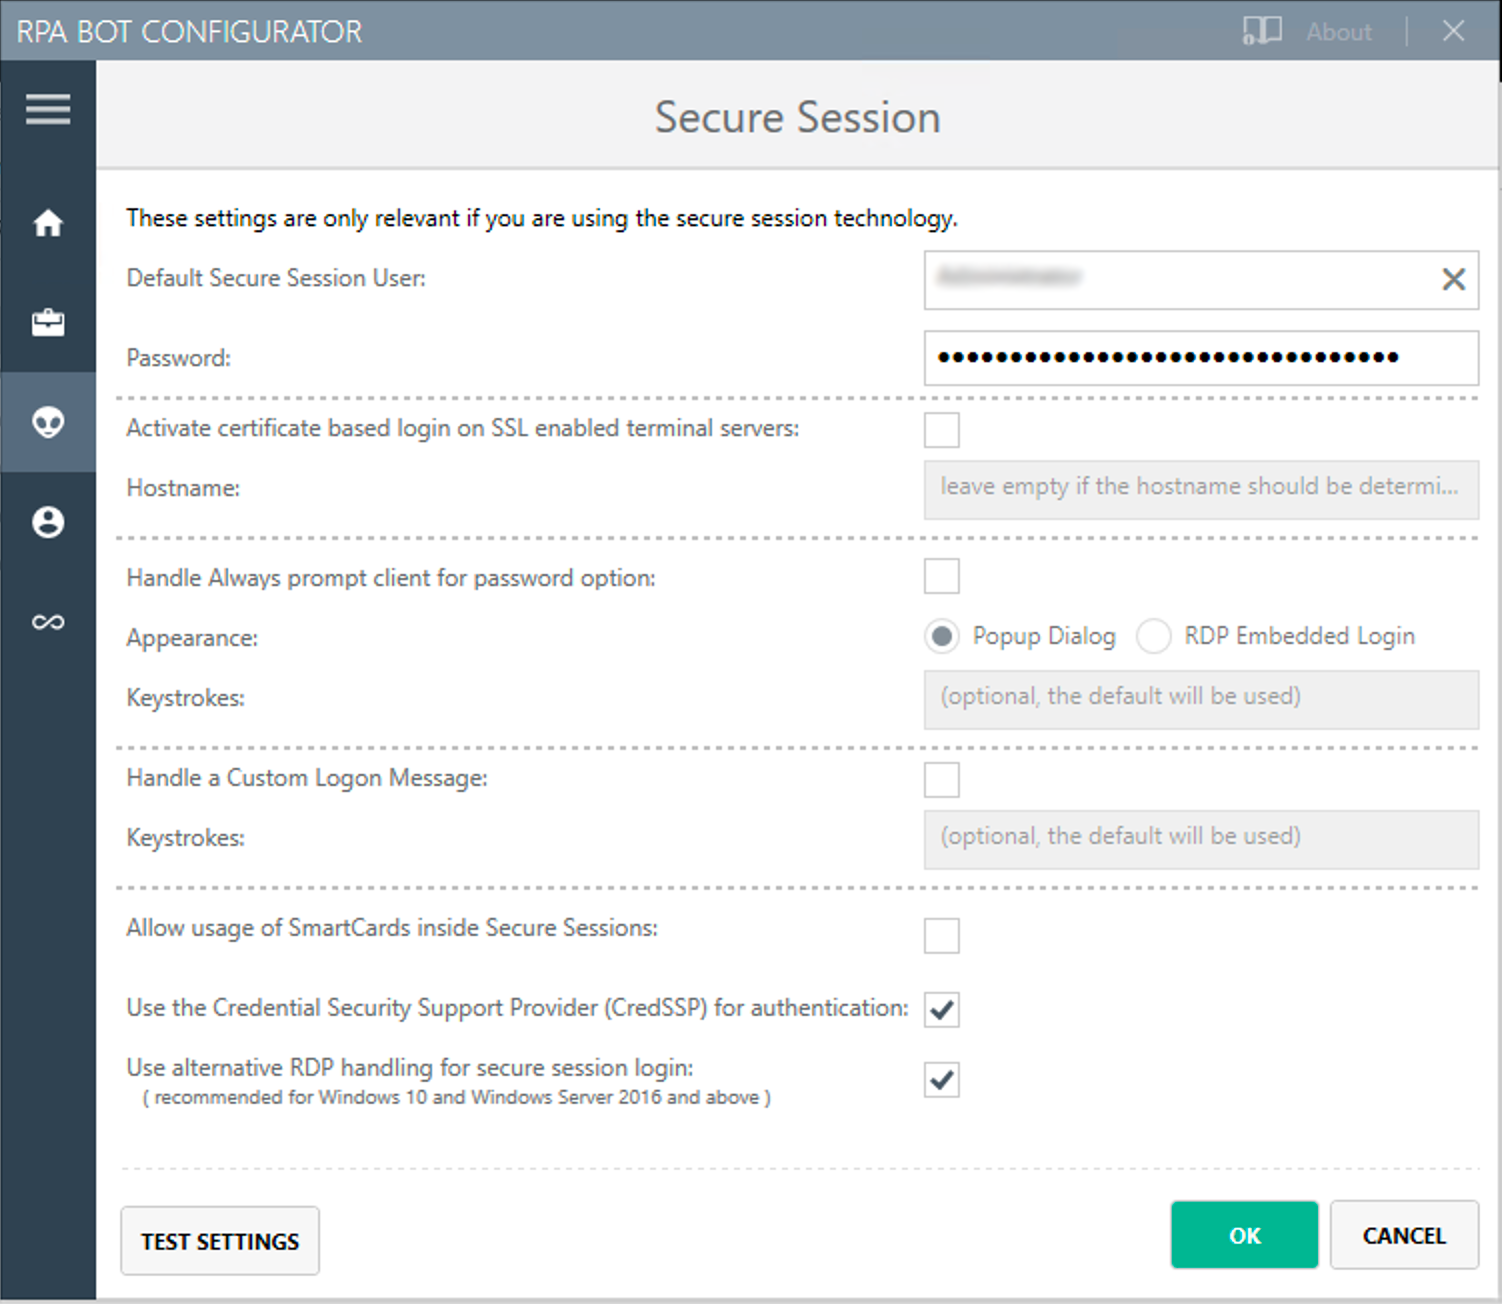 The RPA Bot configurator application showing the Secure Session settings panel